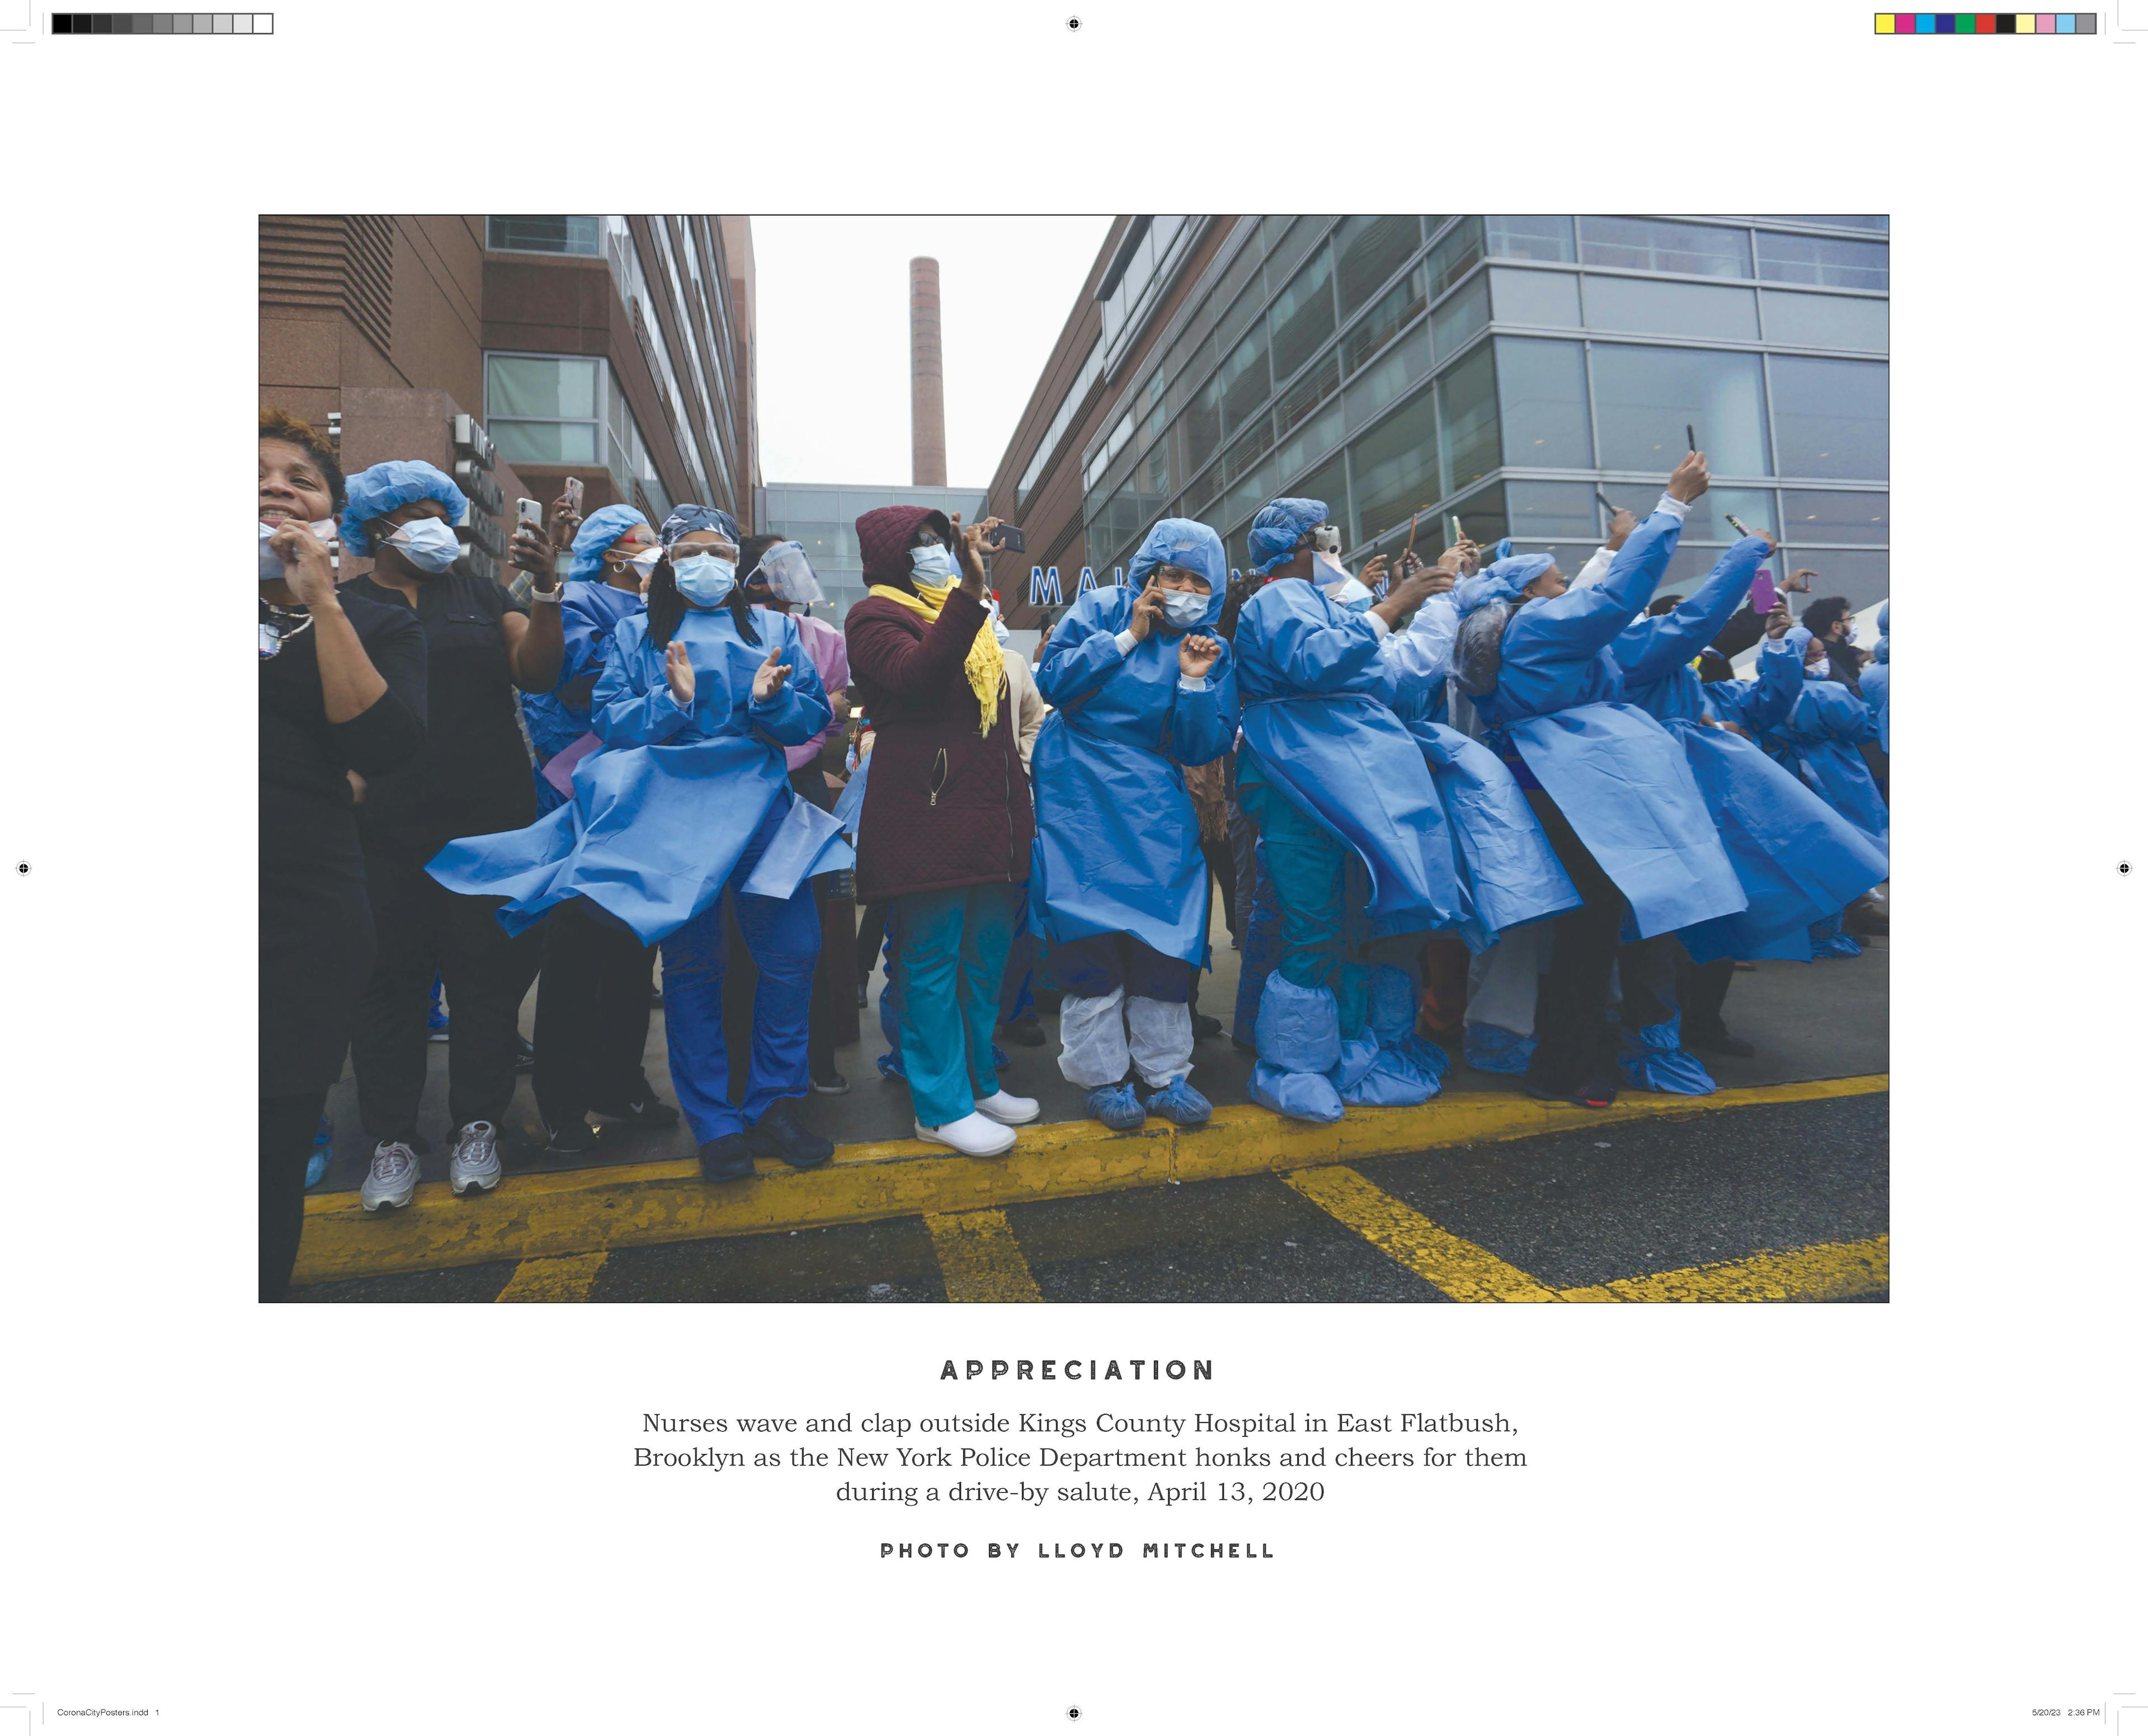 Appreciation  Nurses wave and clap outside Kings County Hospital in East Flatbush, Brooklyn as the New York Police Department honks and cheers for them during a drive-by salute, April 13, 2020.  (Photo by Lloyd Mitchell published in Corona City.) 